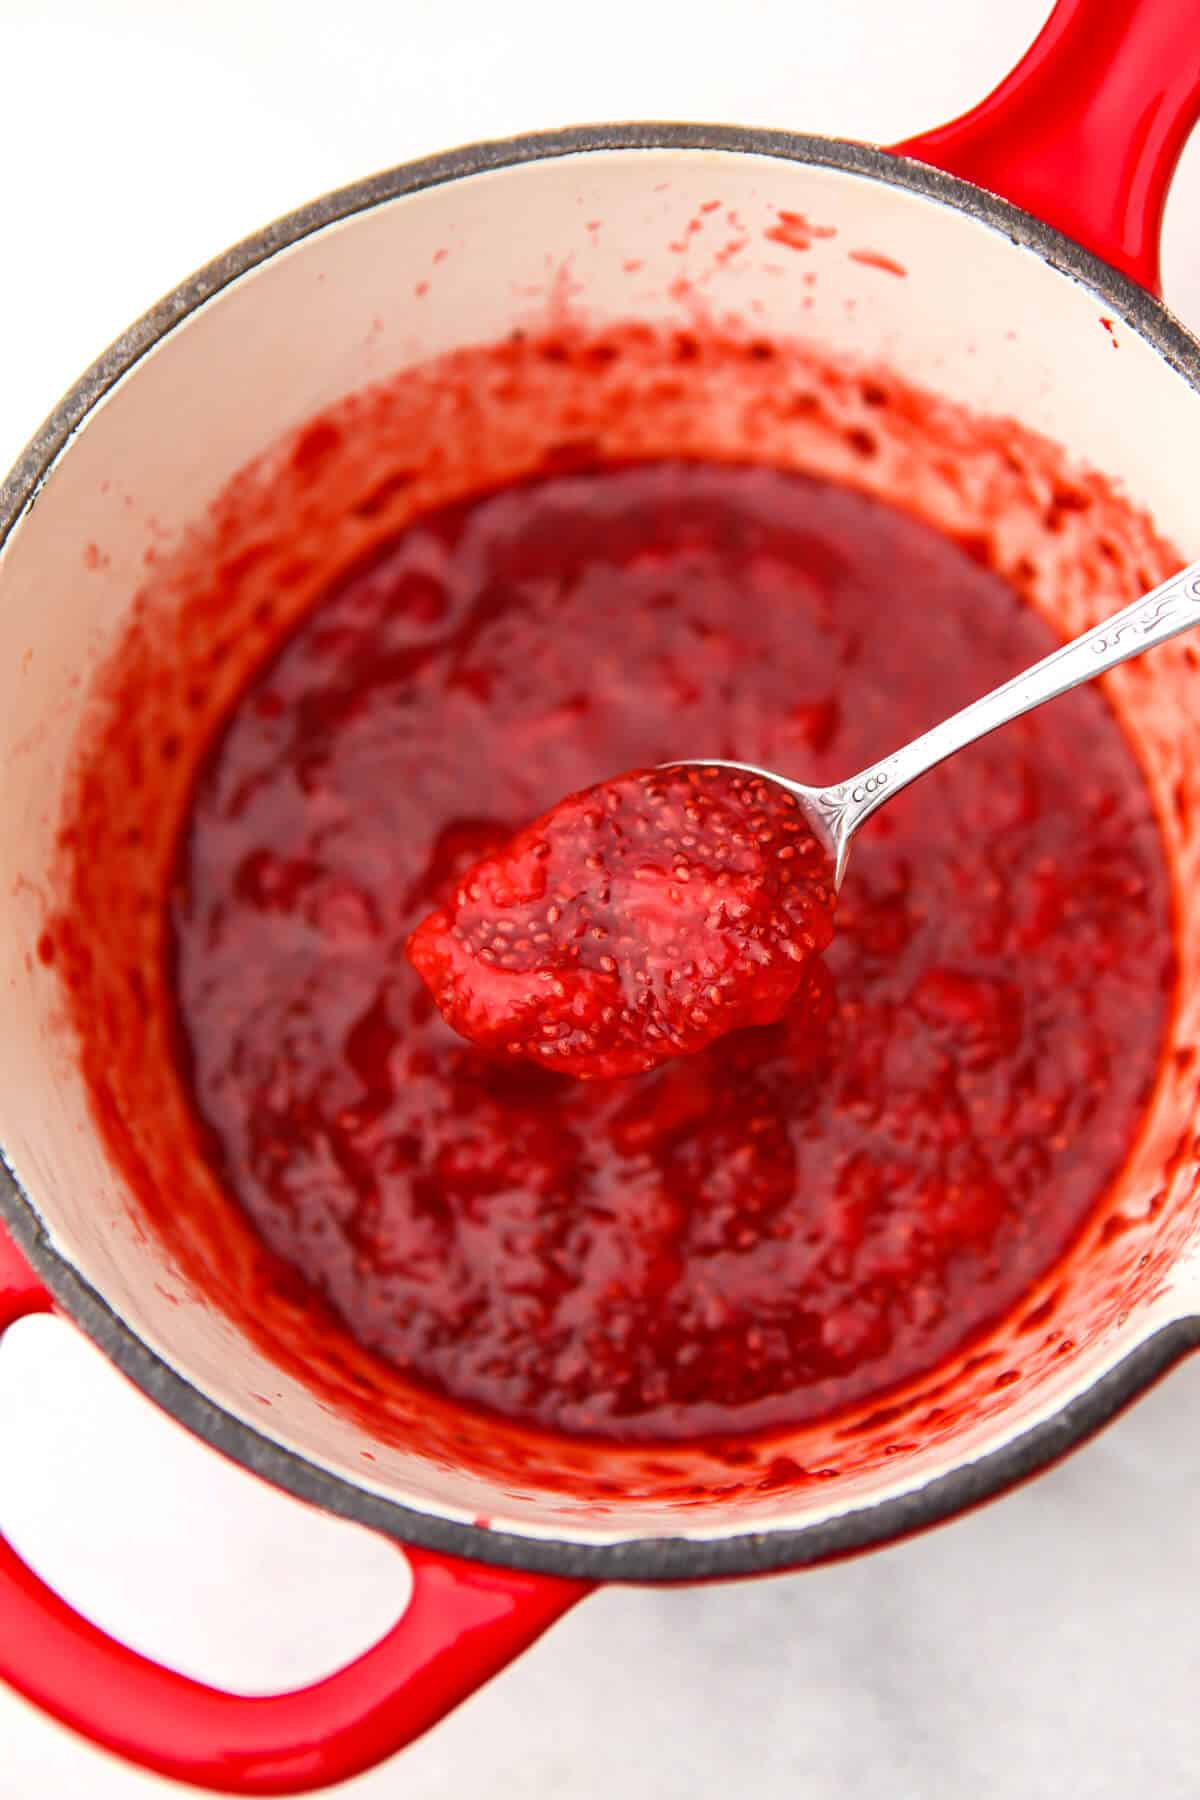 A red saucepan filled with fresh strawberry jam made with chia seeds being scooped up with a spoon.